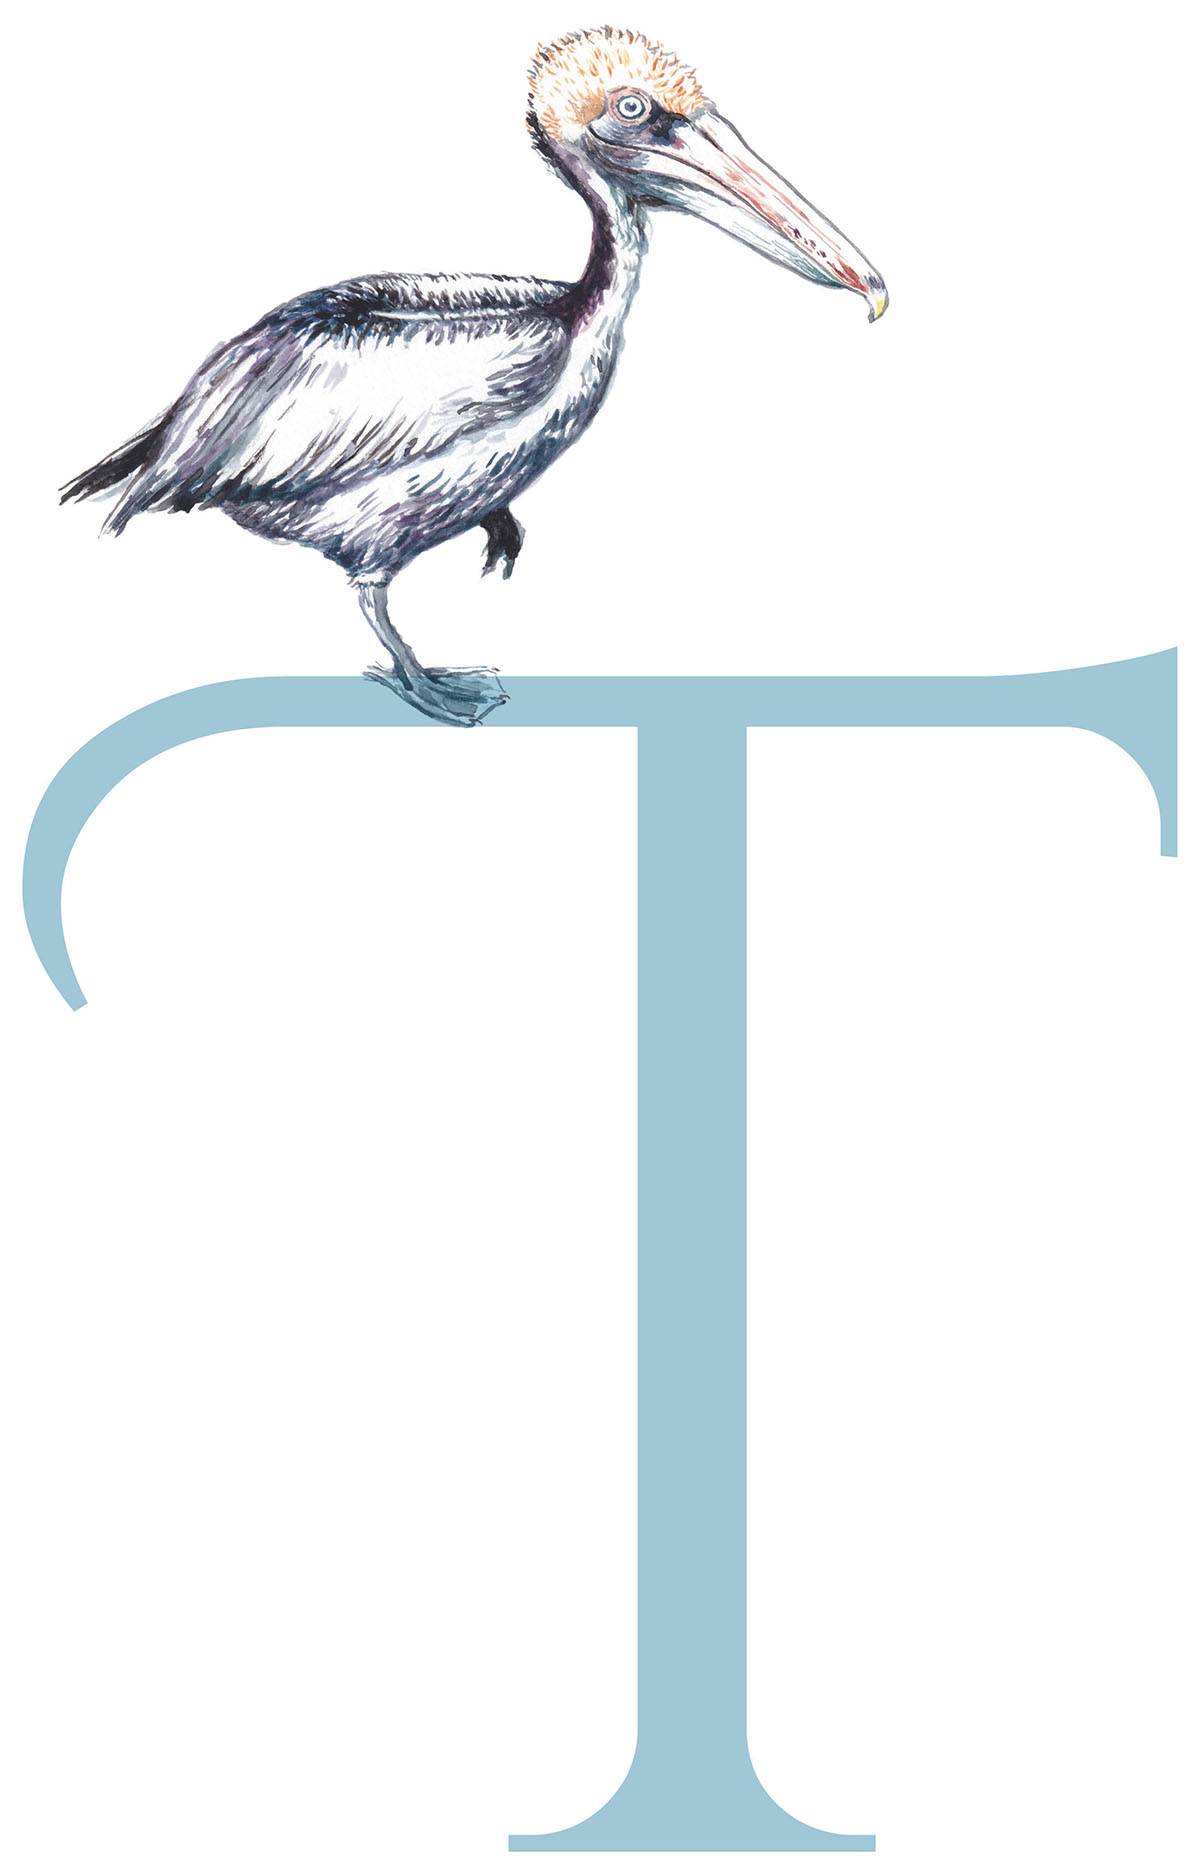 A letter T with a bird sitting on top